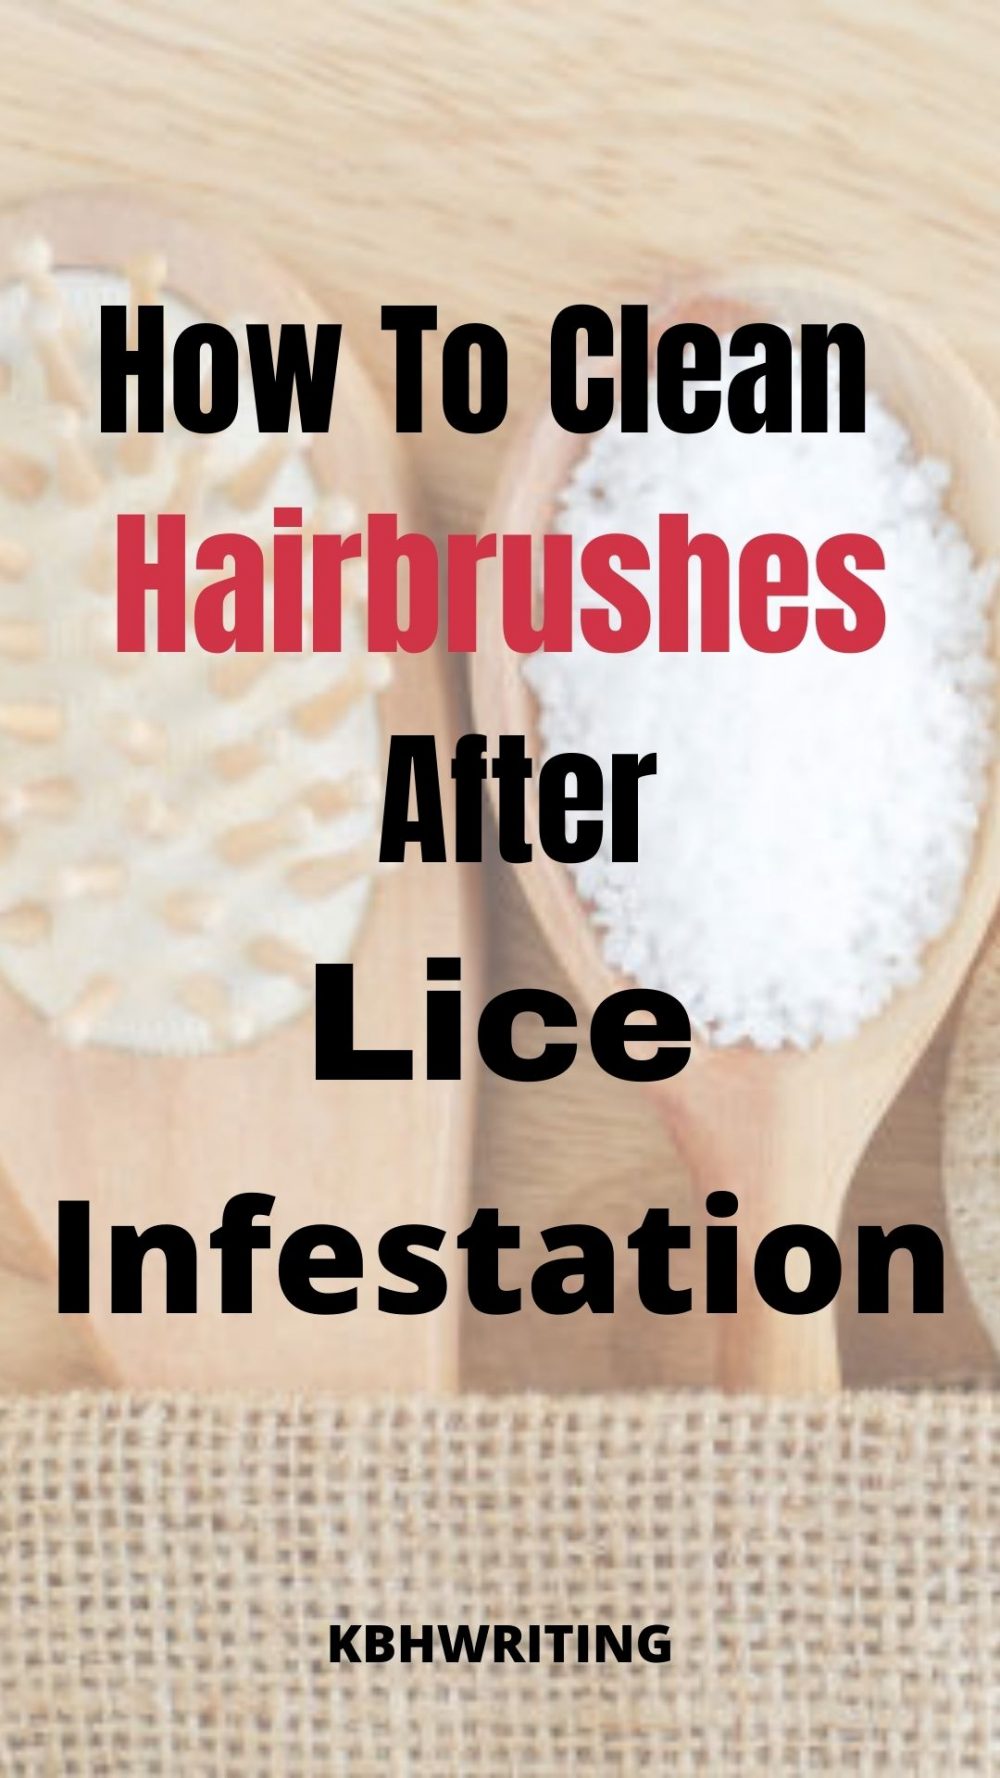 How To Clean Hairbrush After Lice Infestation